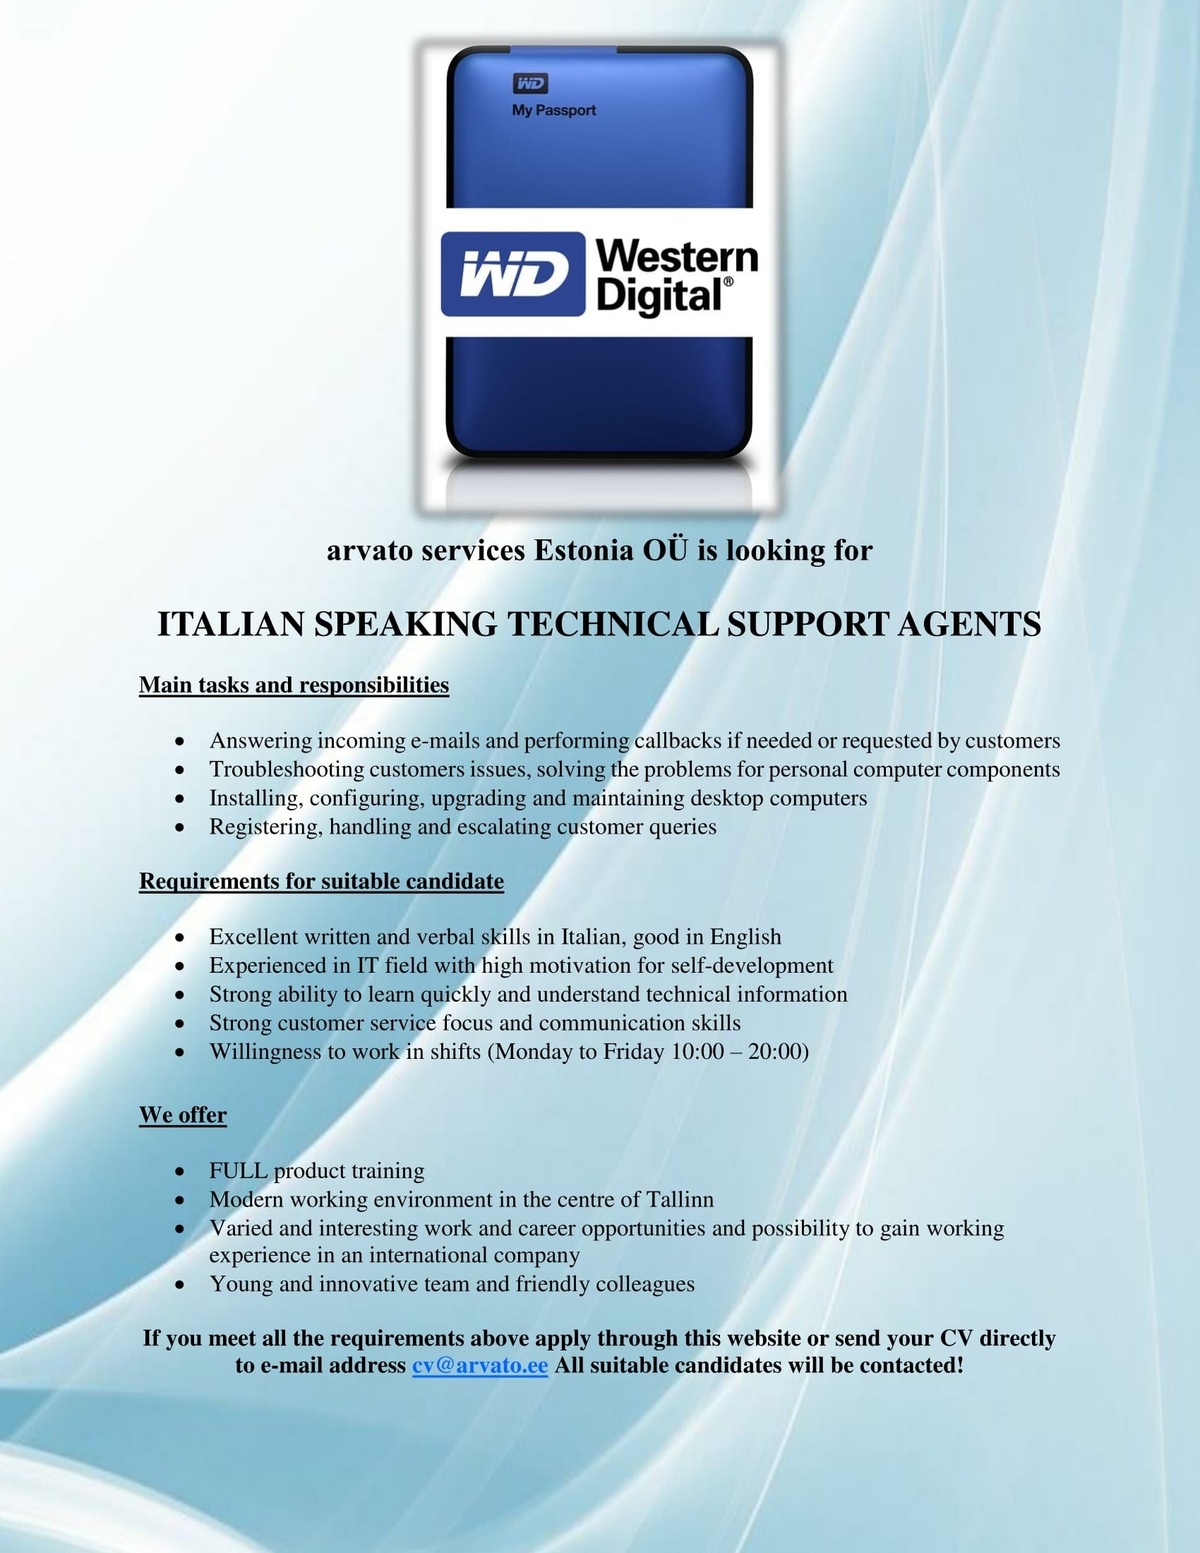 Arvato Services Estonia OÜ Italian Speaking Technical Support Agent with IT skills